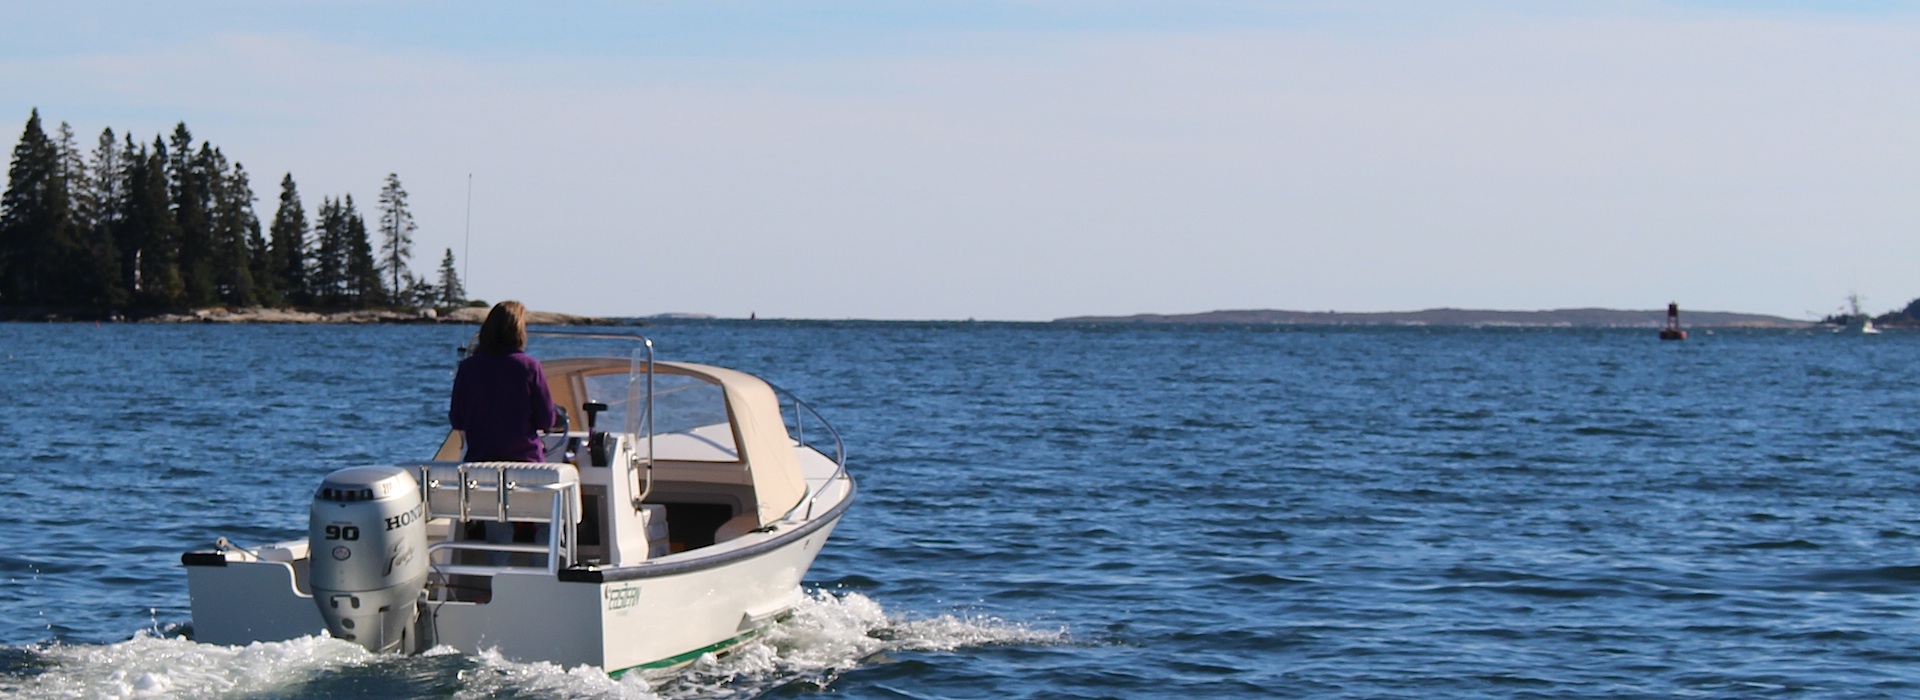 Boat Rentals on Boothbay Harbor